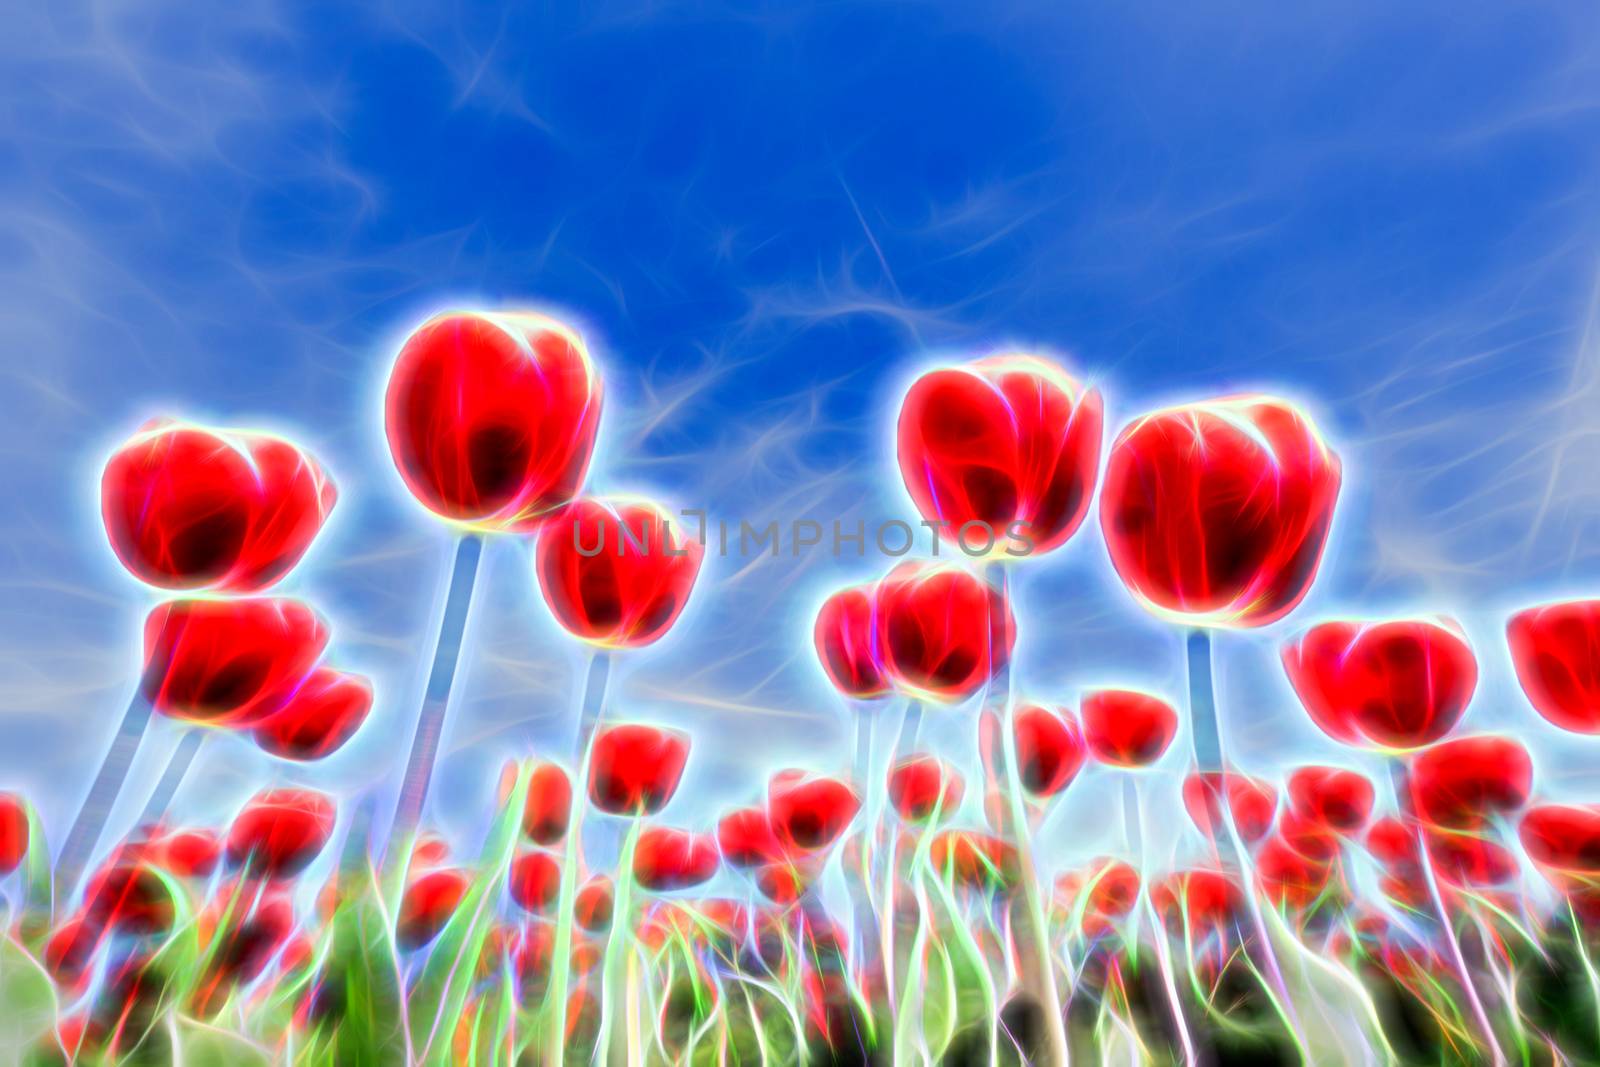 Light effects in group of red tulips with blue sky by BenSchonewille